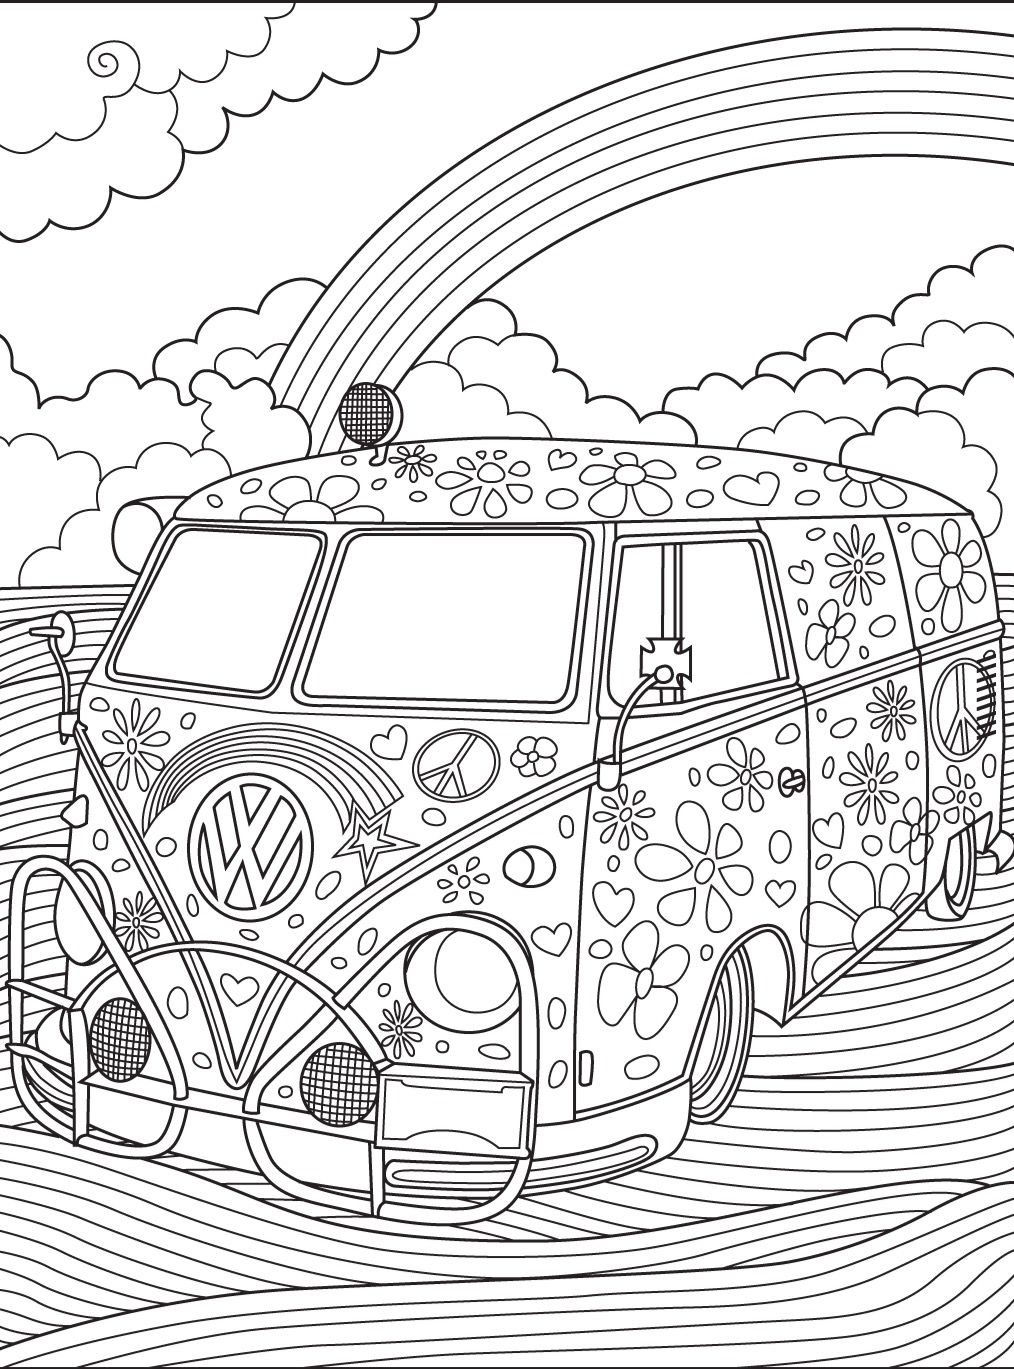 Animal Vw Coloring Pages for Adult